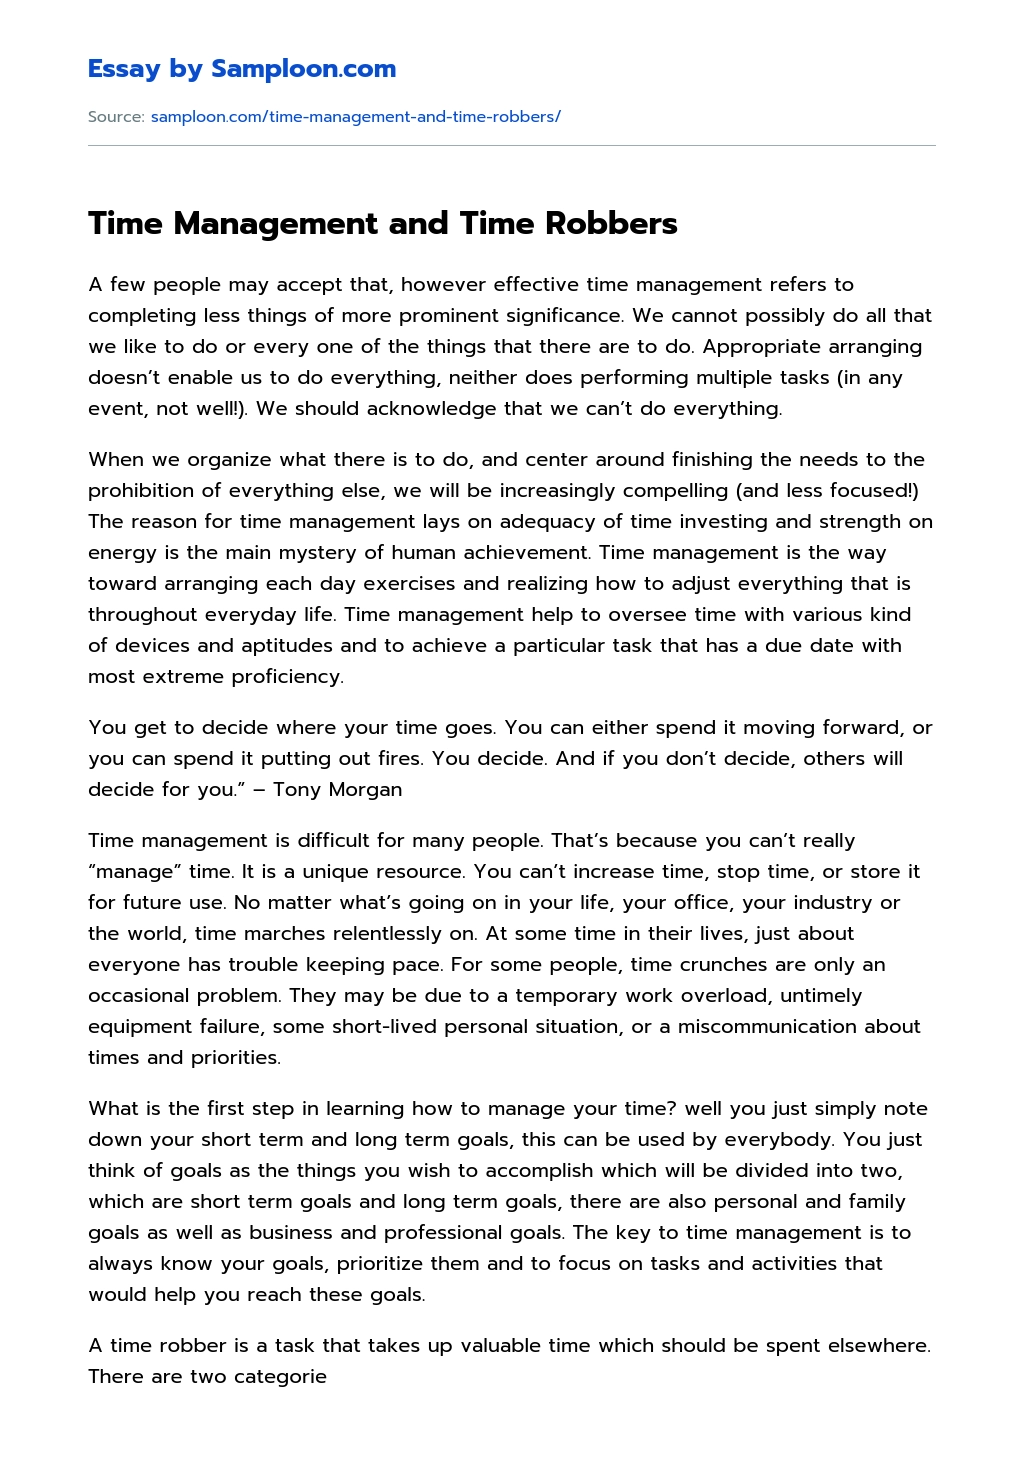 Time Management and Time Robbers essay